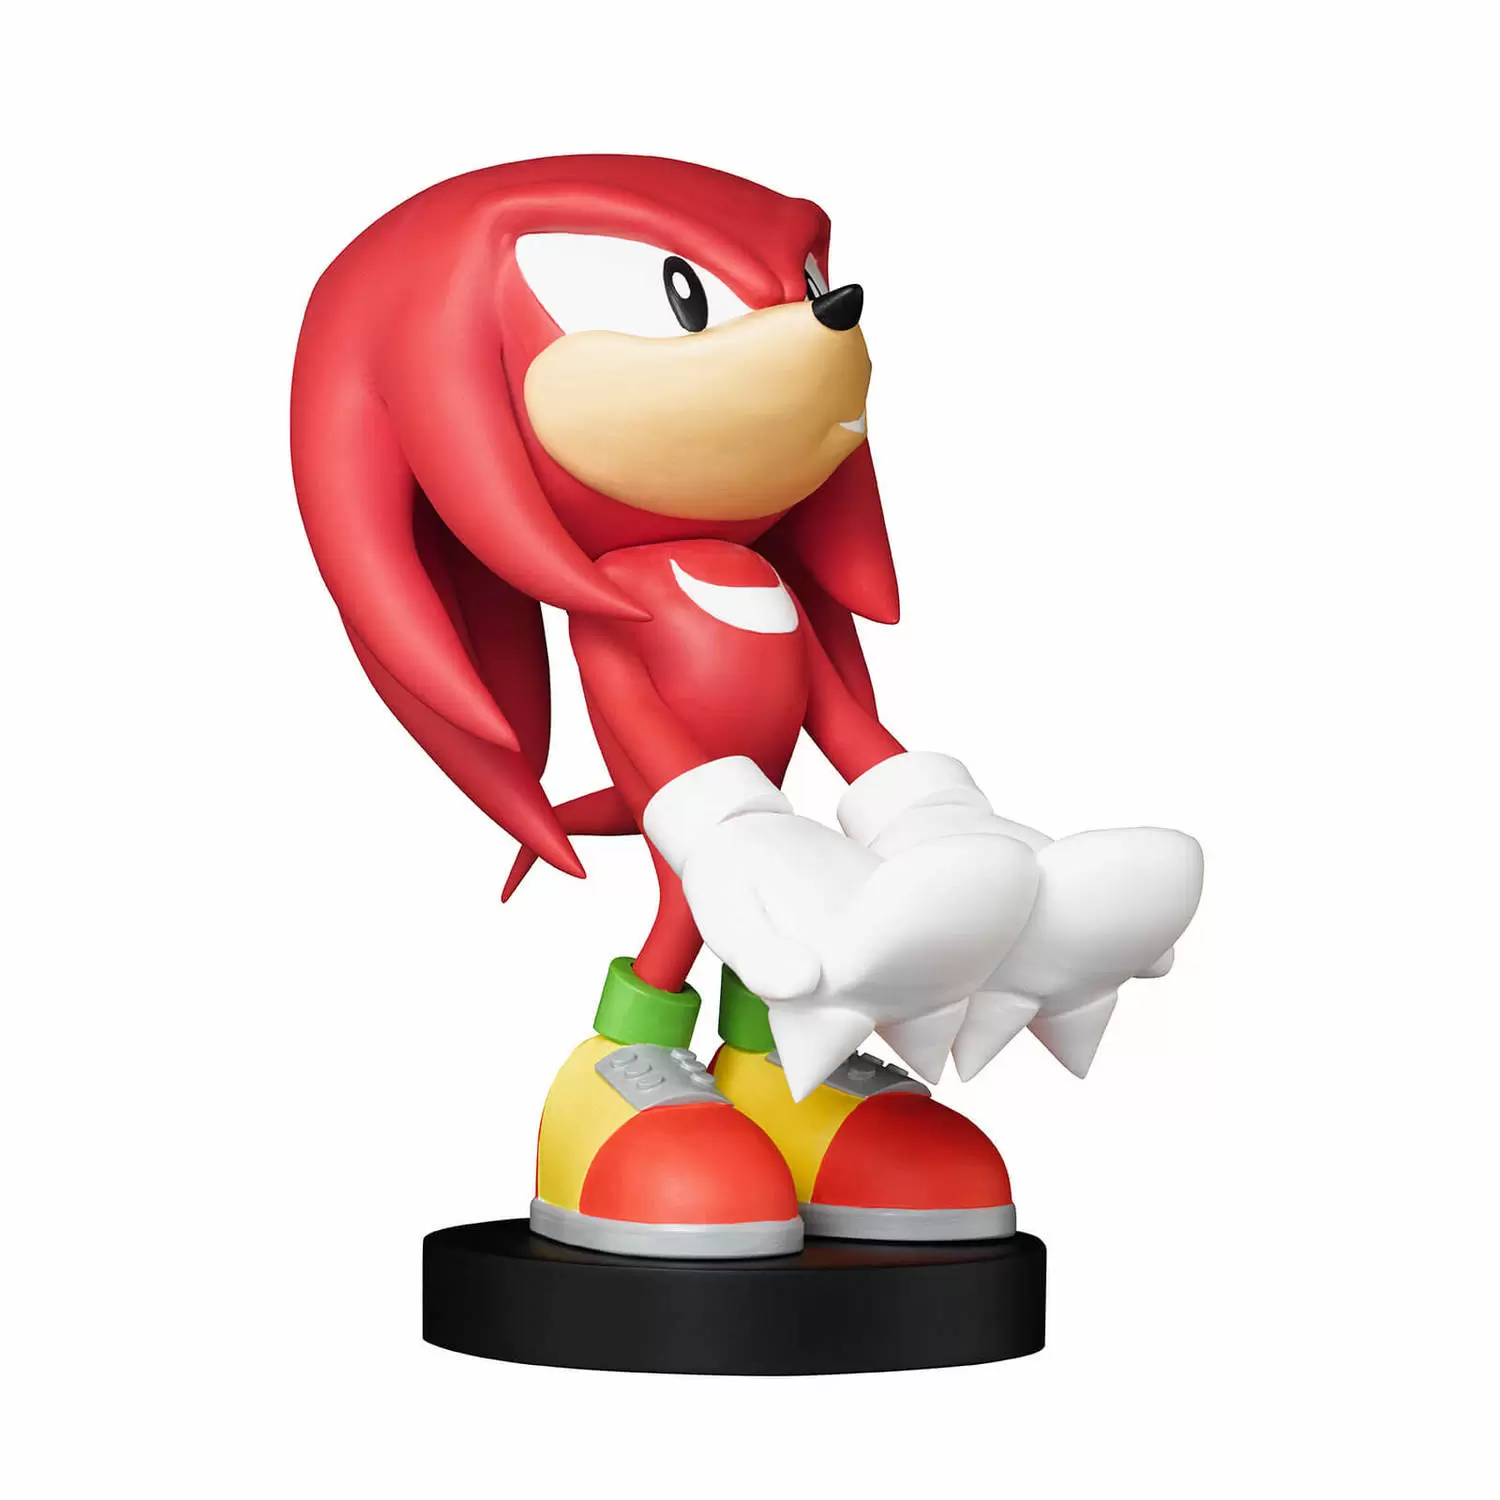 Sonic the Hedgehog - Knuckles - Cable Guys action figure